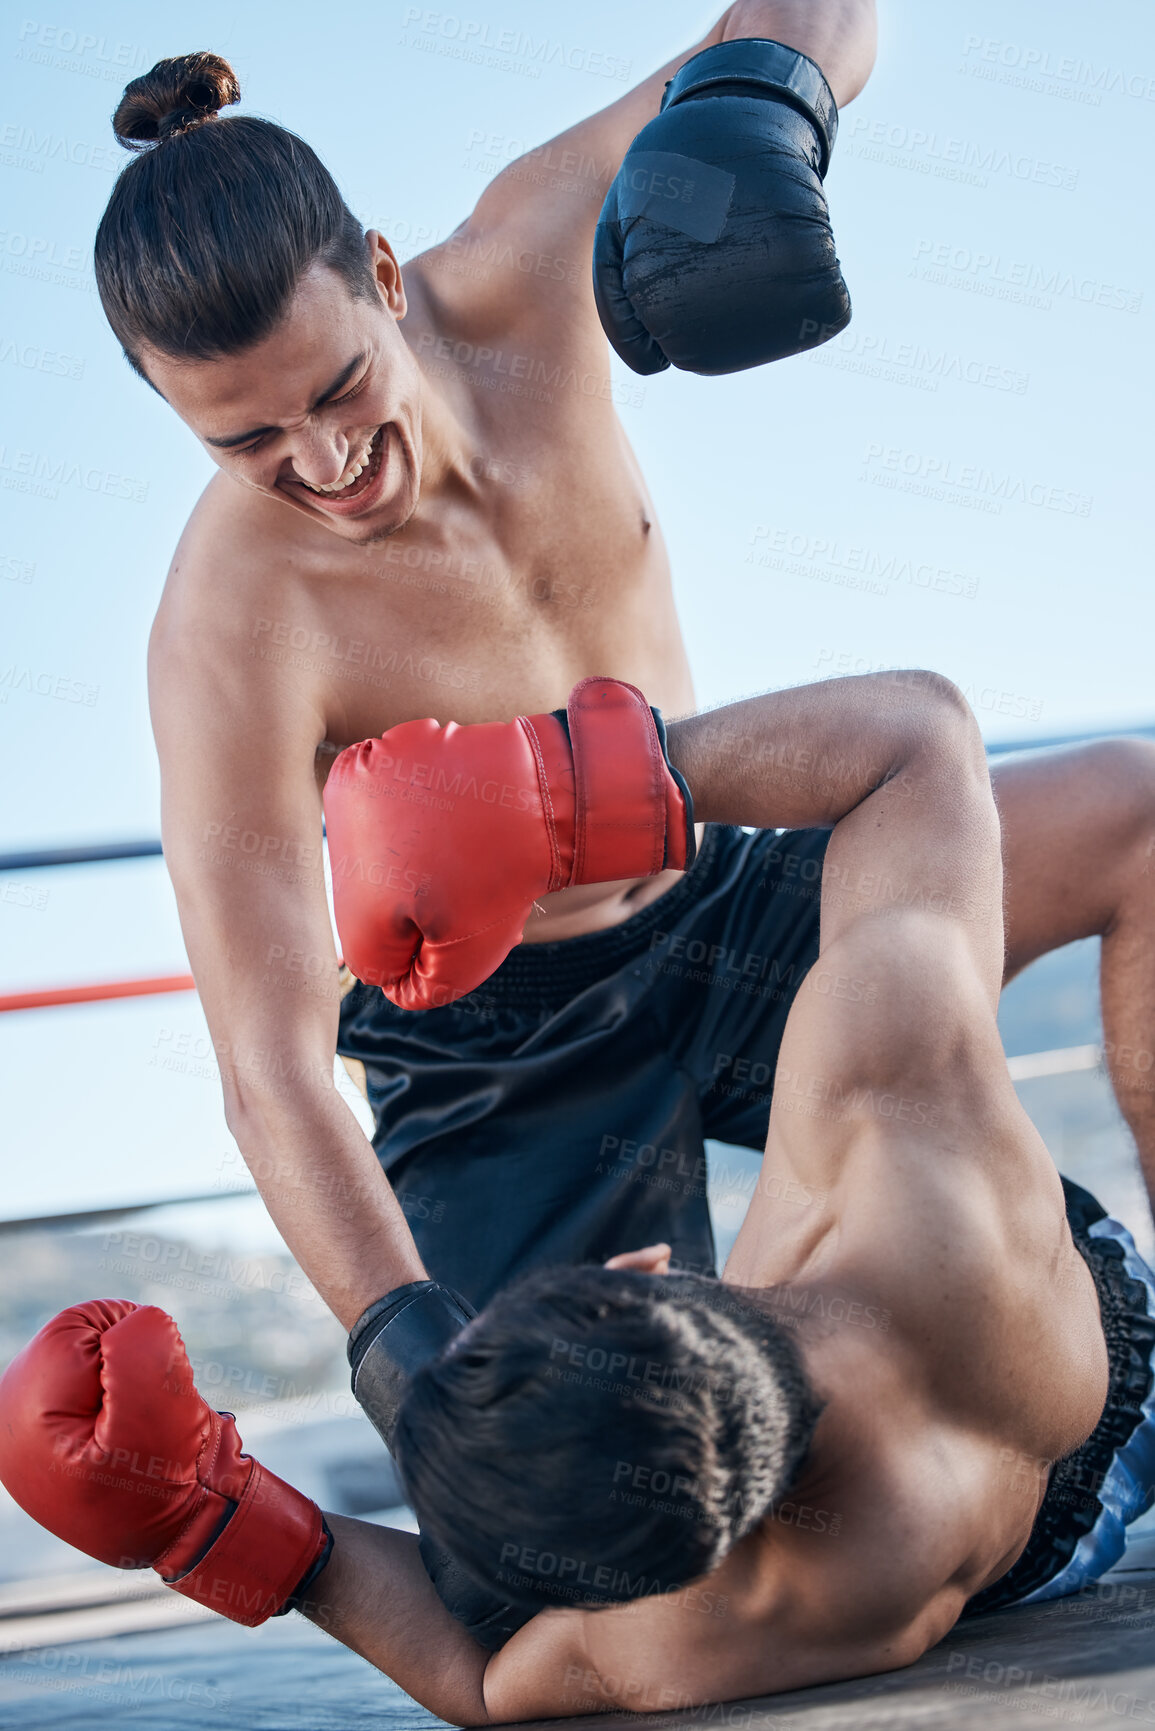 Buy stock photo Floor, boxing ring or angry man fighting in sports exercise, workout or match competition in city outside. Ground punch, boxers or fighters fighting in fitness workout or mma battle for self defense